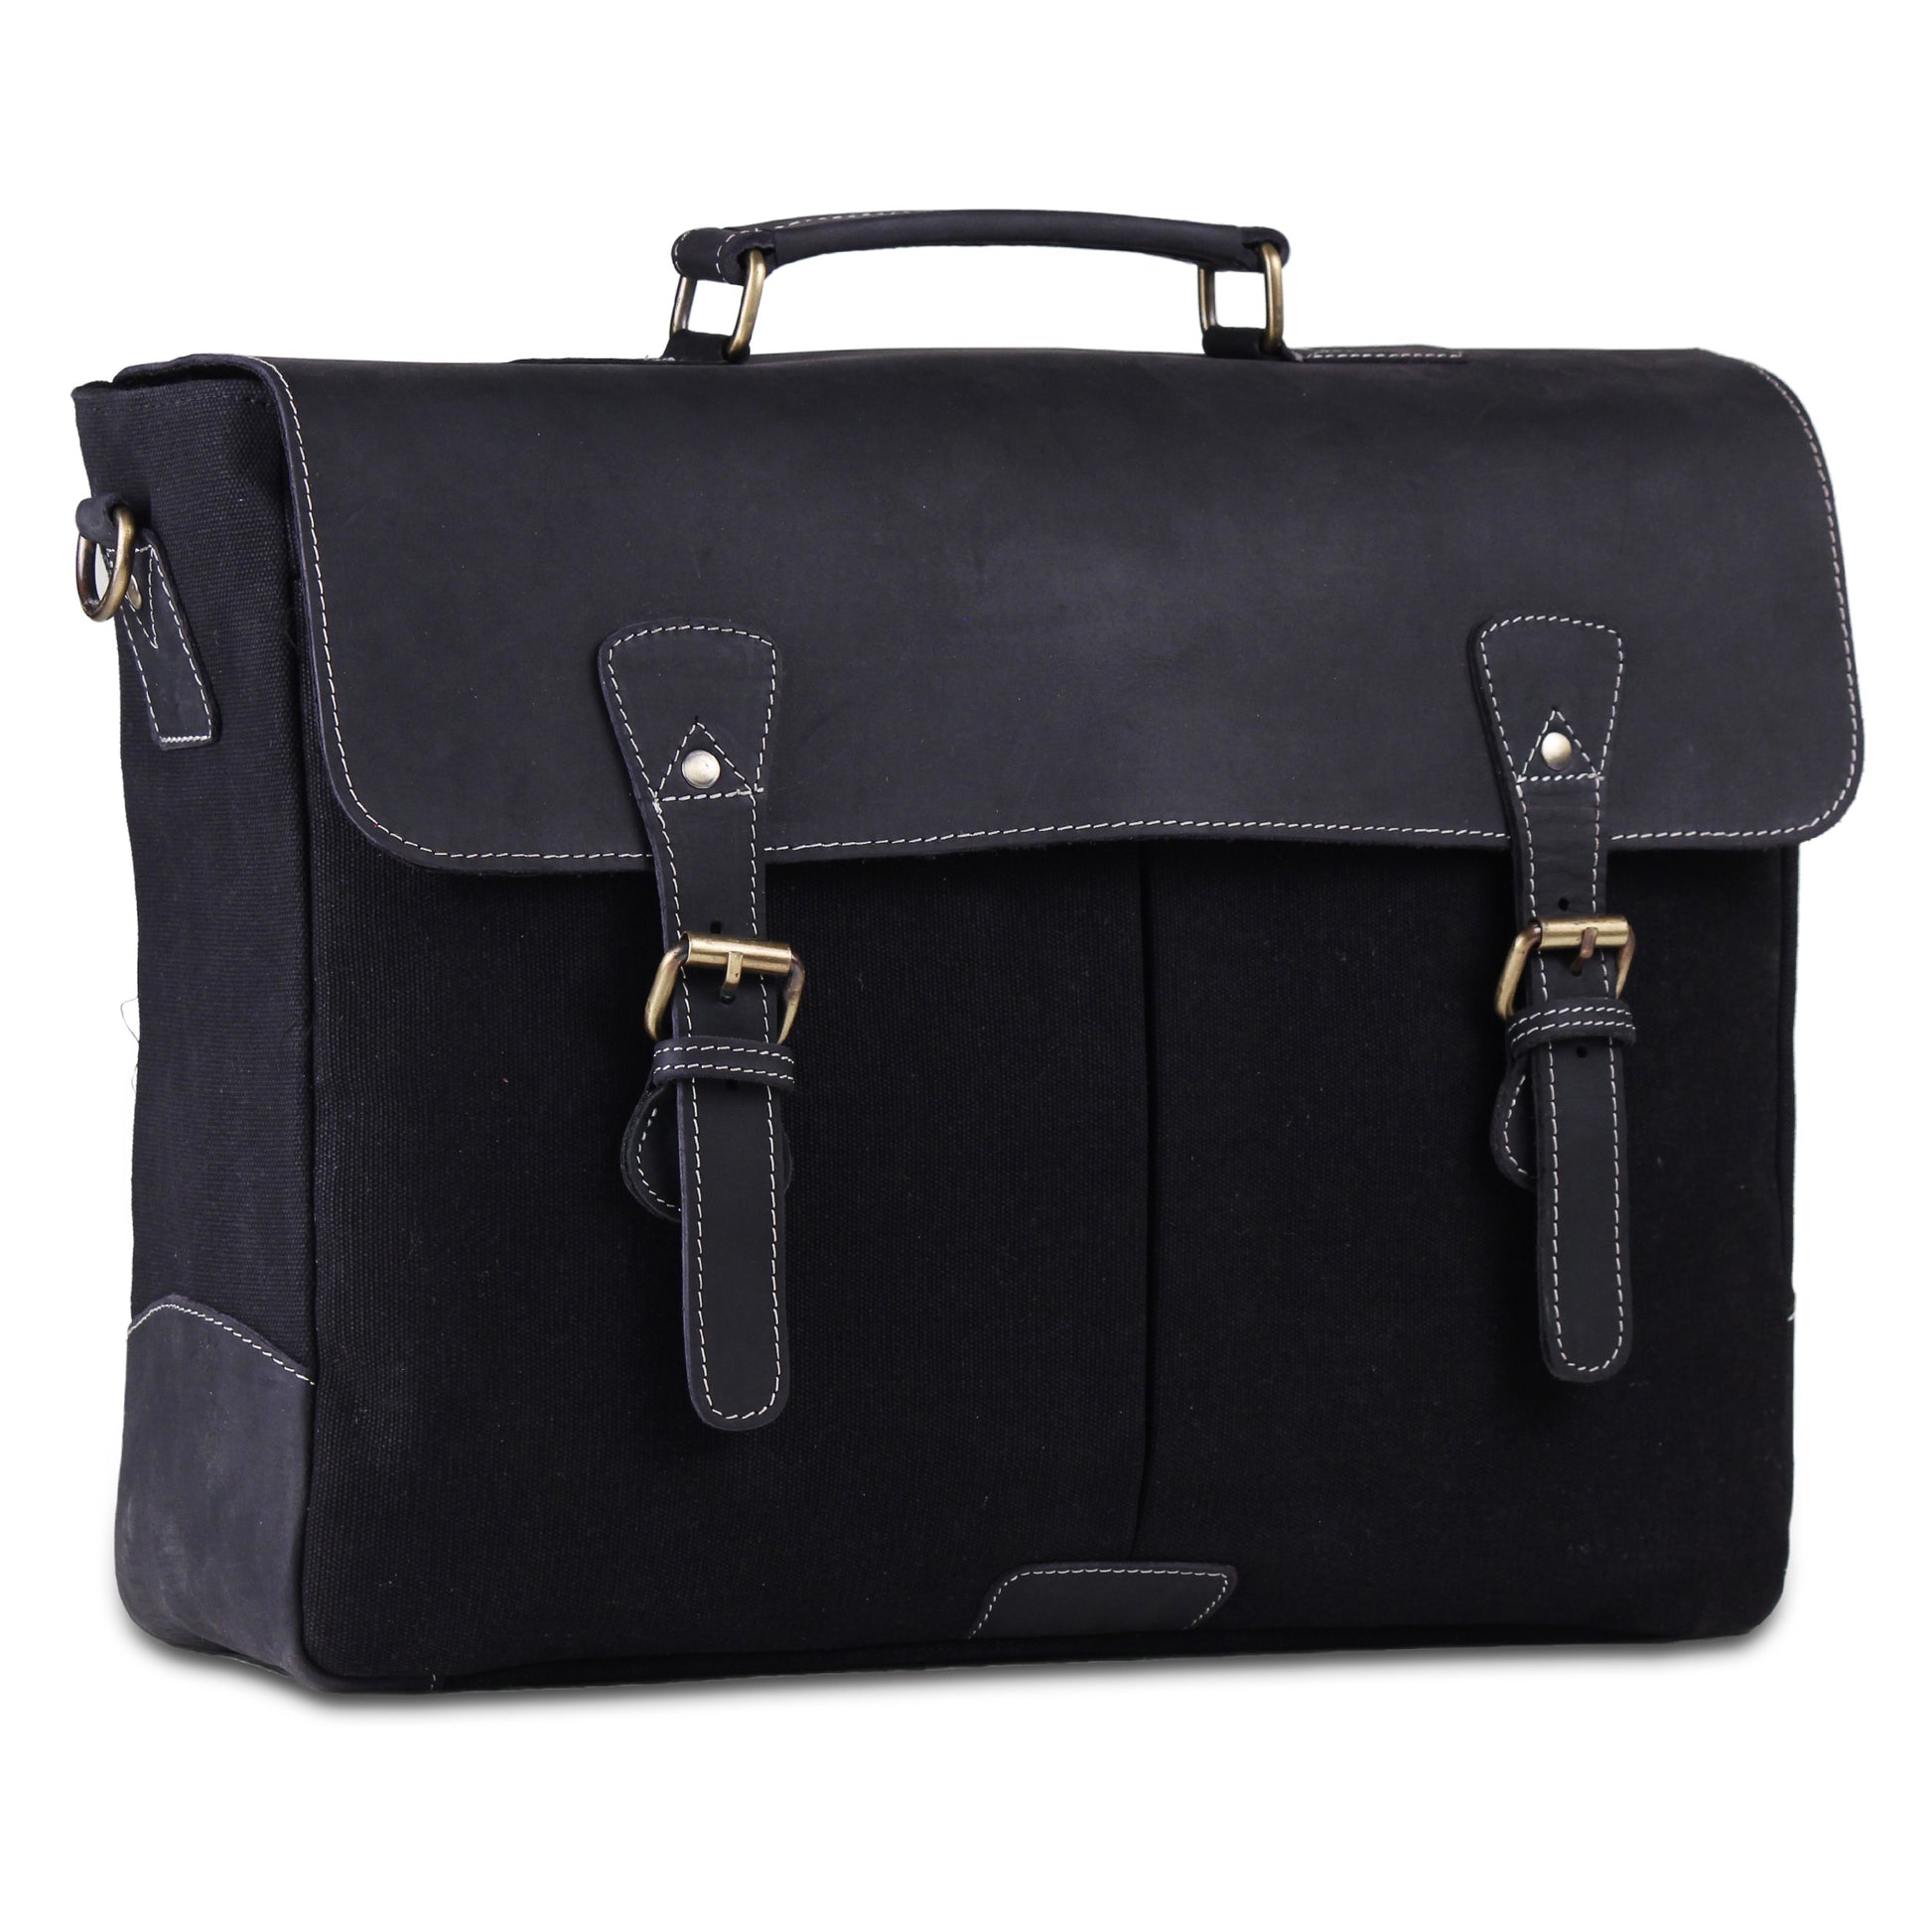 Genuine Leather Messenger Laptop Briefcase Bag with Top Handle and Adjustable strap